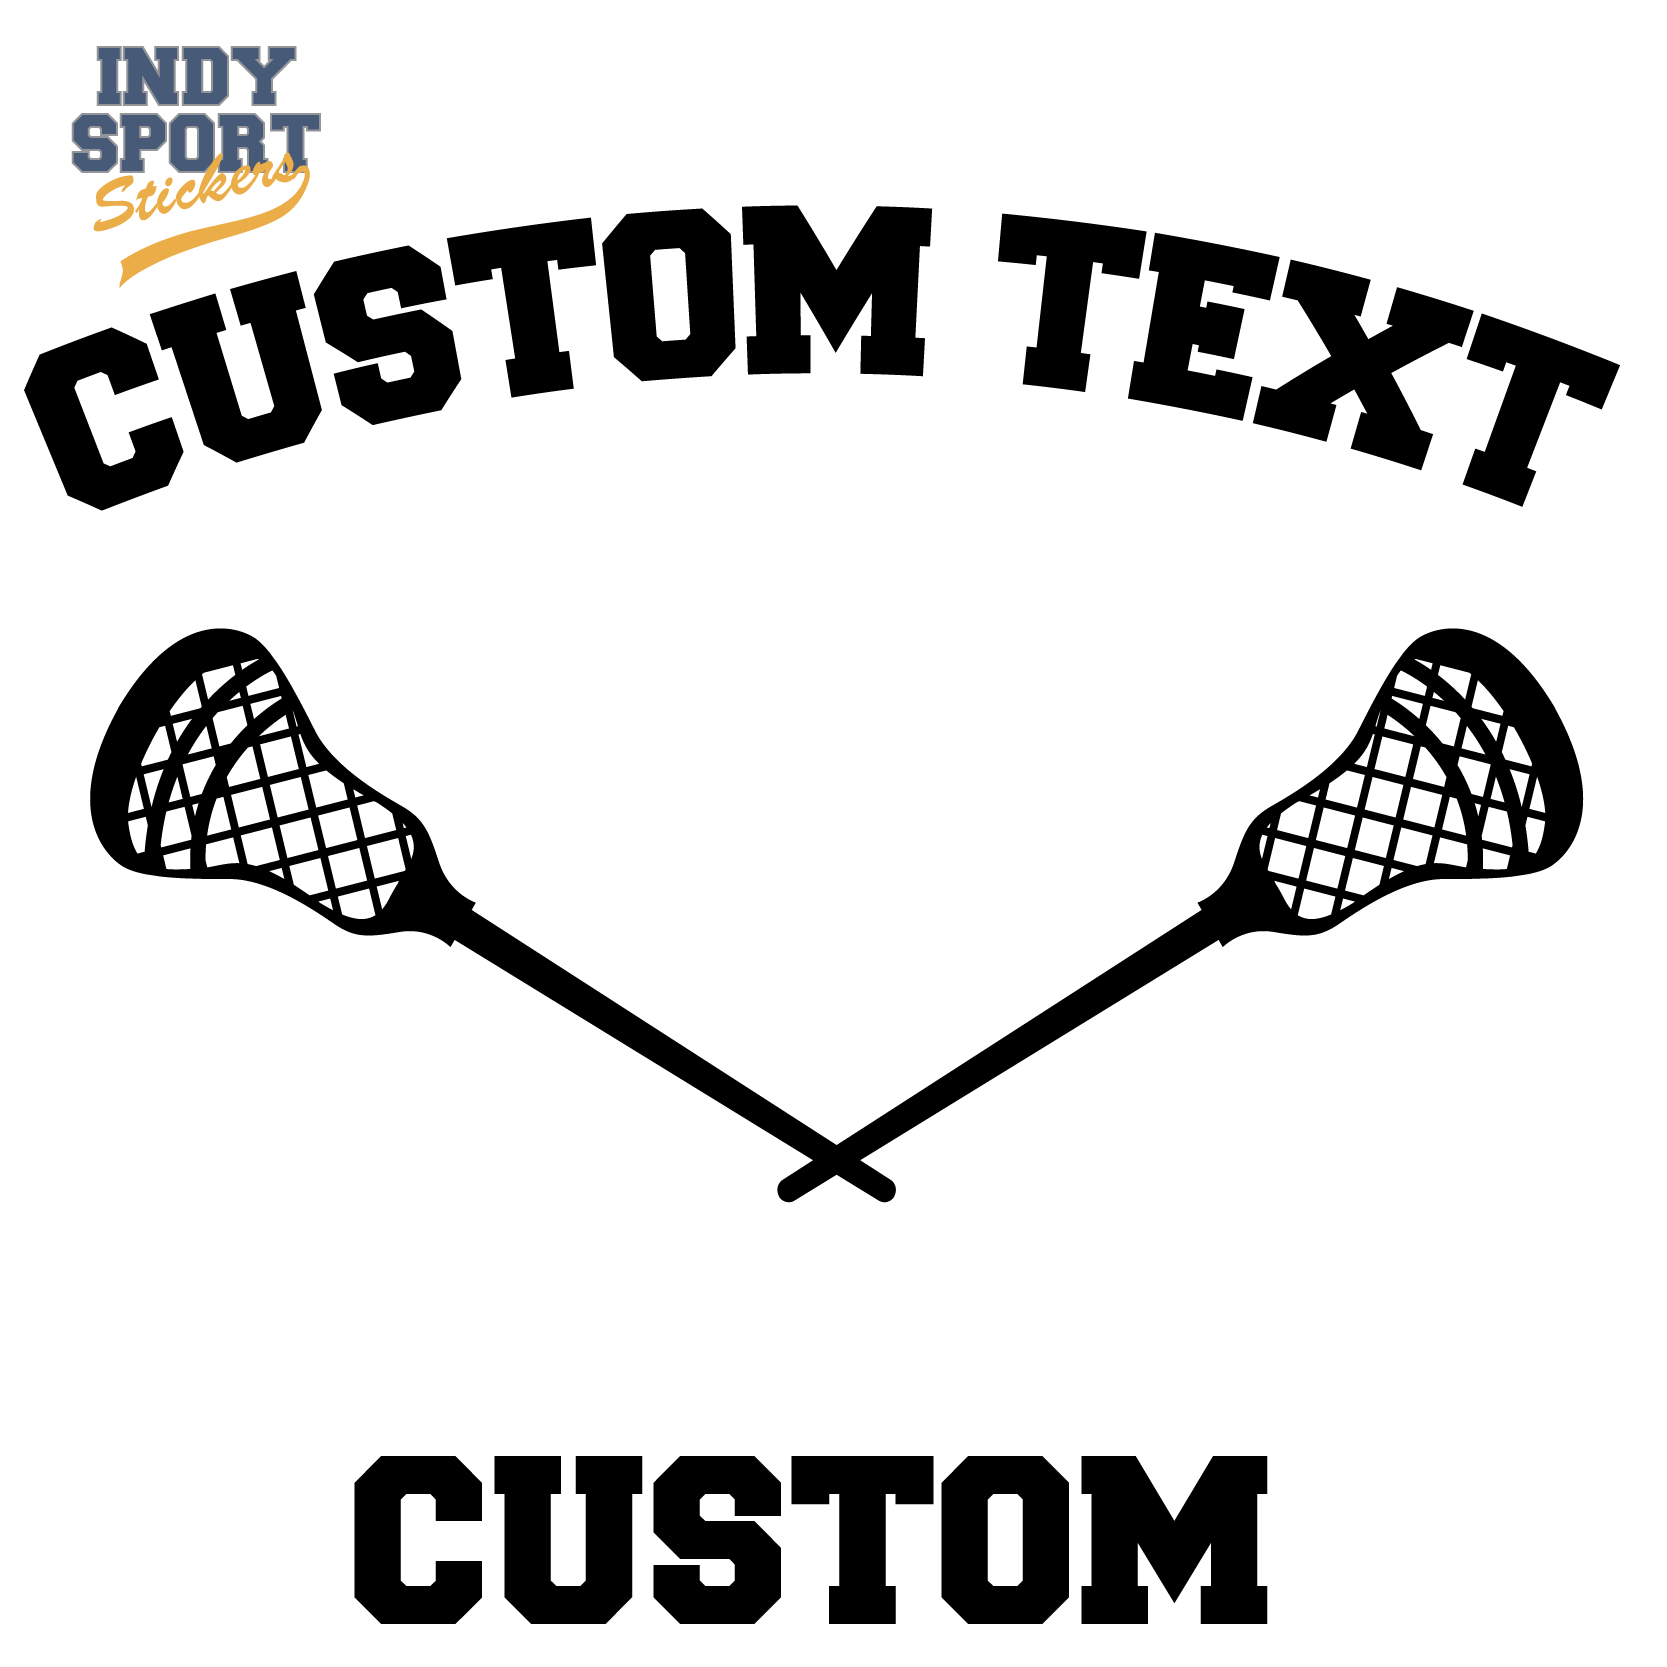 Lacrosse Sticks Crossed with Ball and Lacrosse Text - Indy Sport Stickers